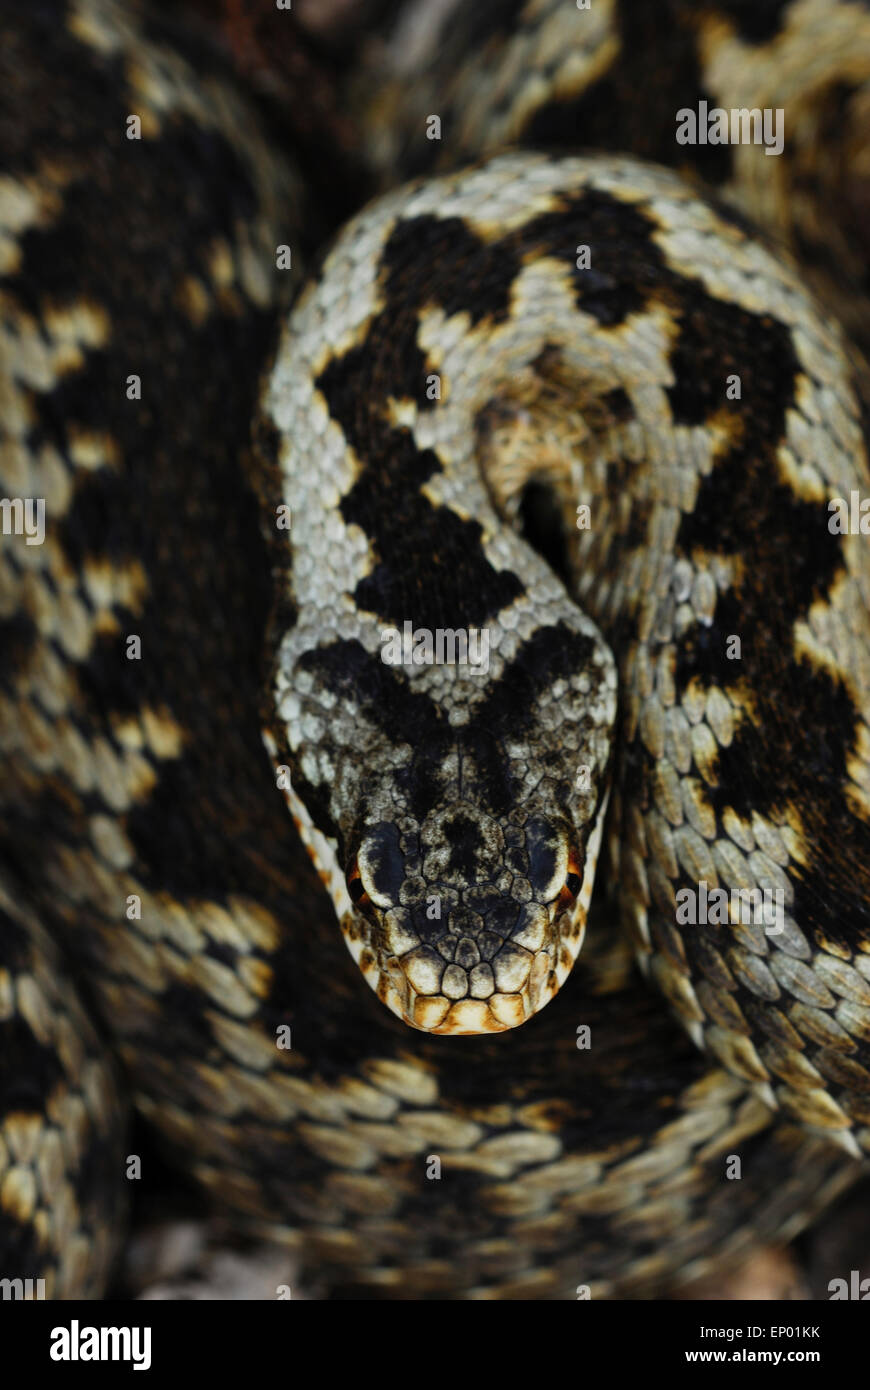 A curled up adder UK Stock Photo